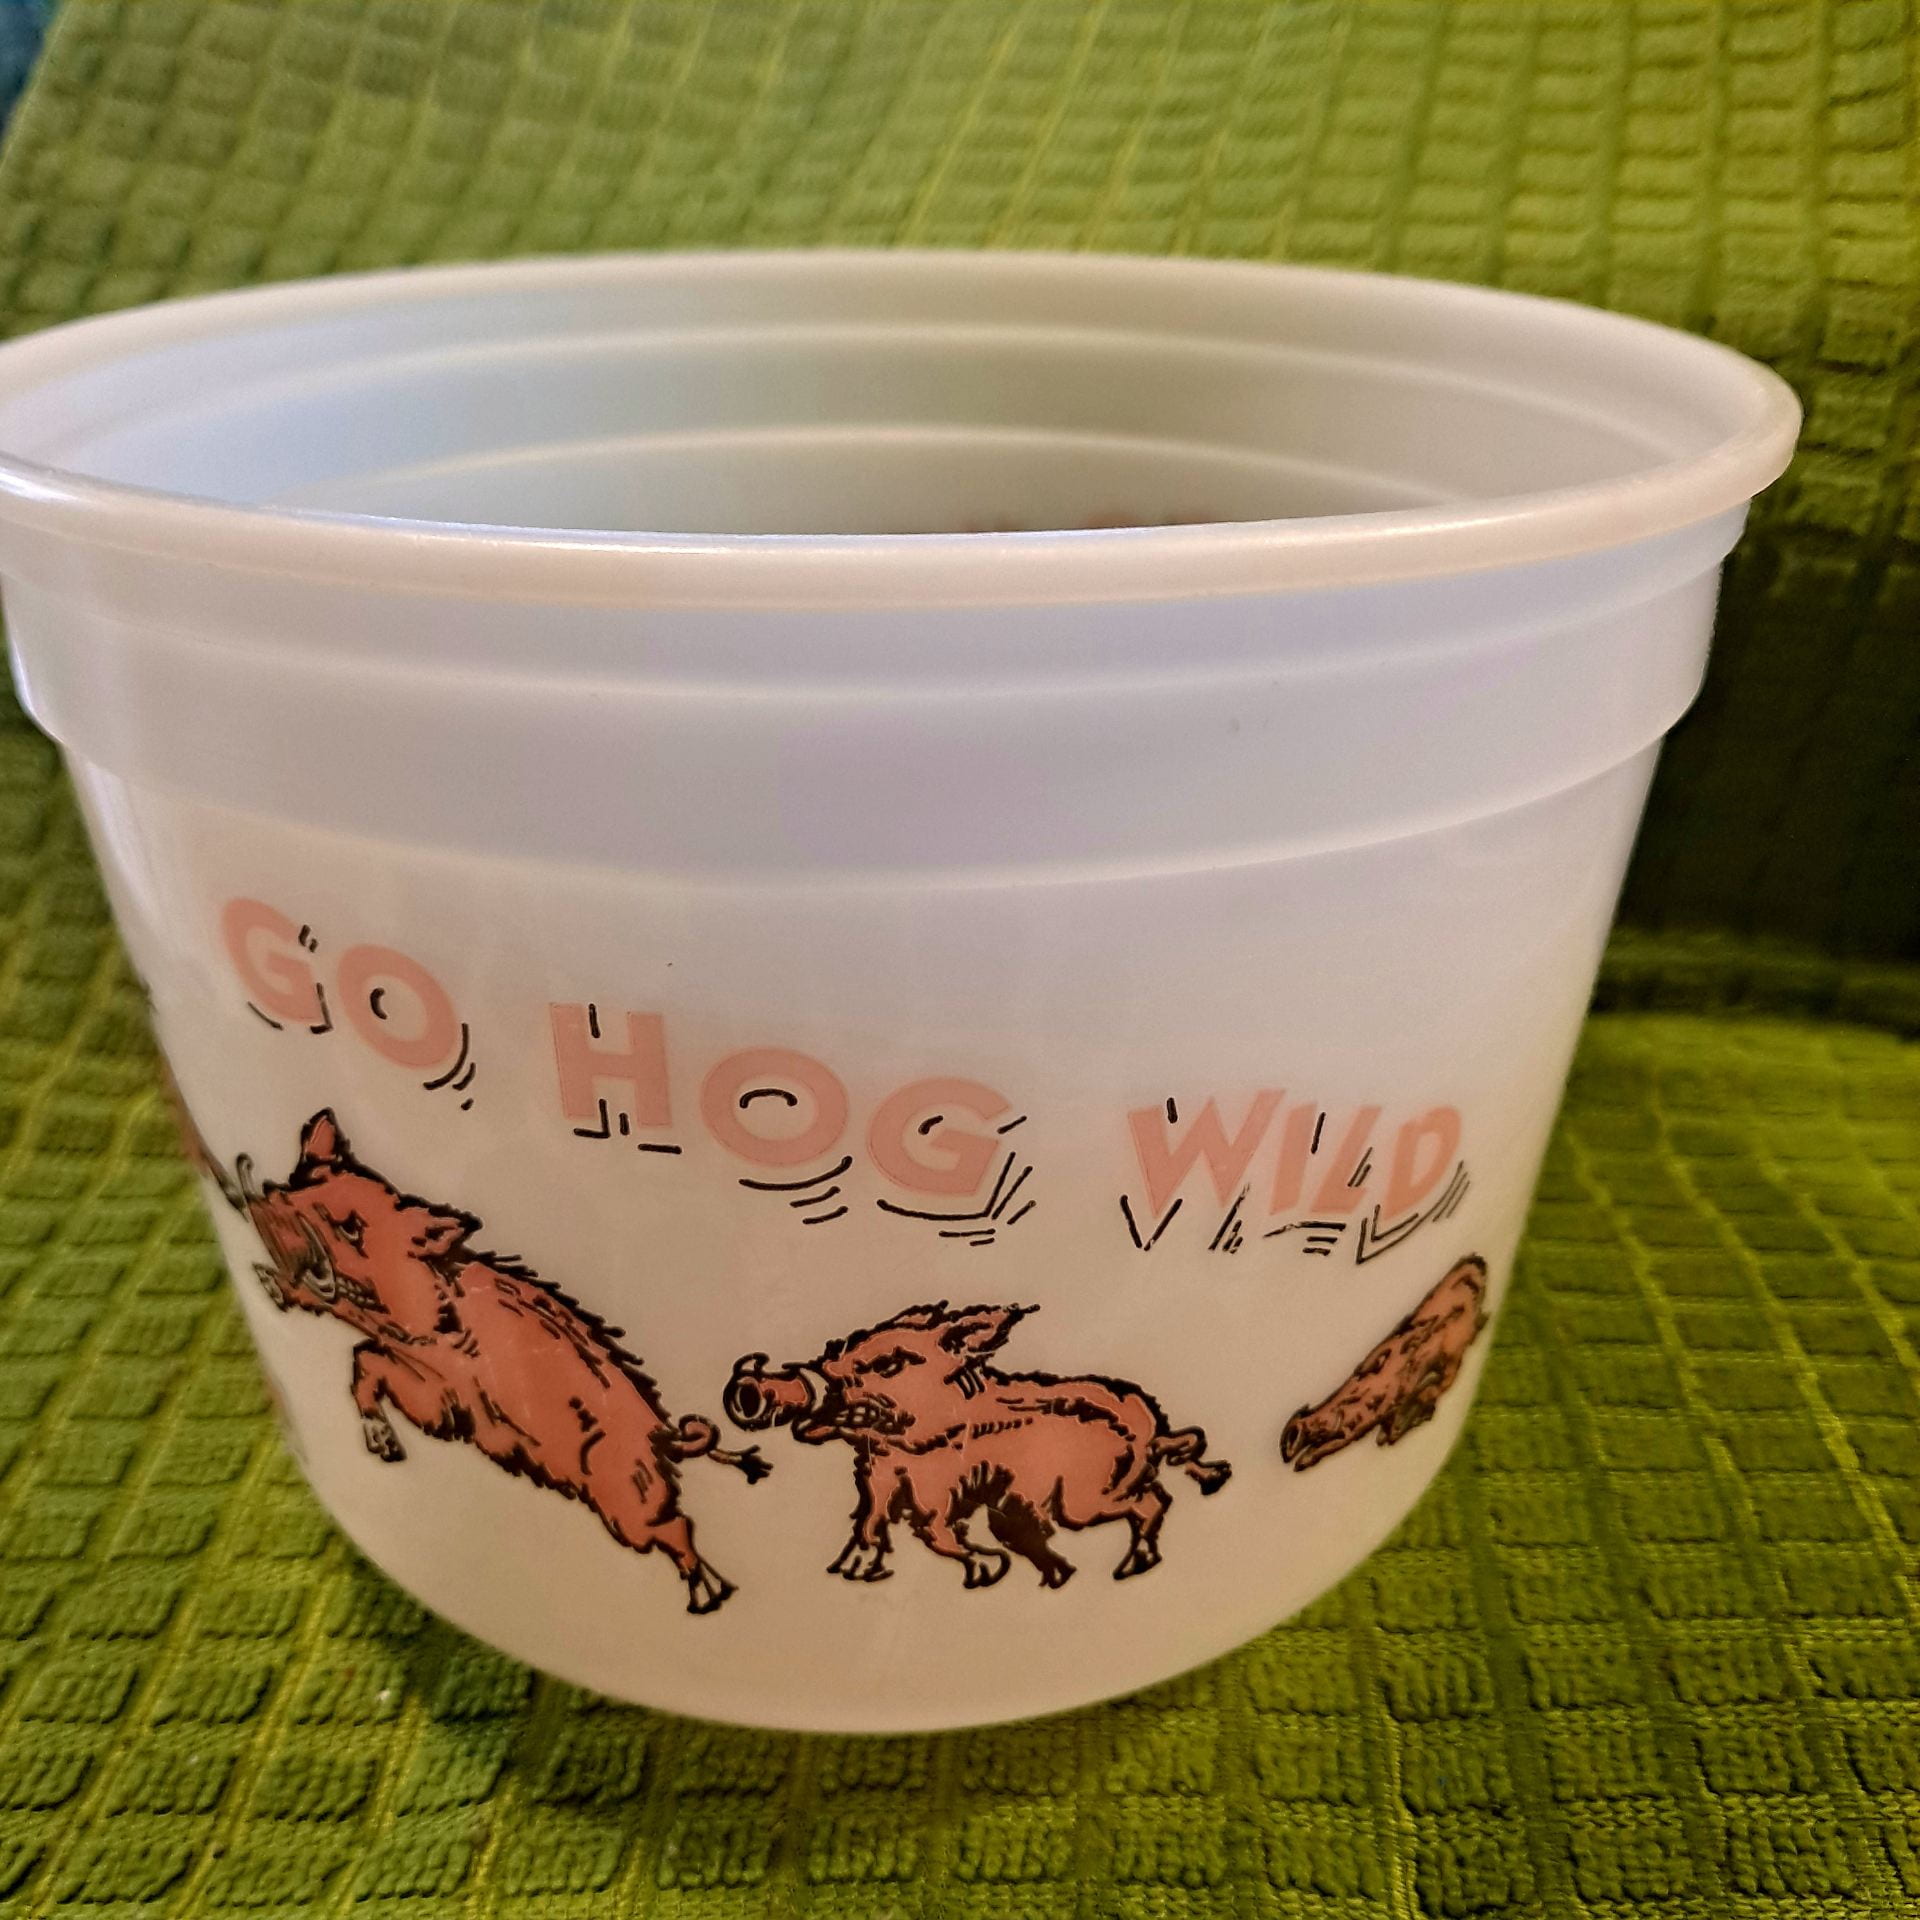 A plastic popcorn container with "Go hog wild" and three hogs running underneath.